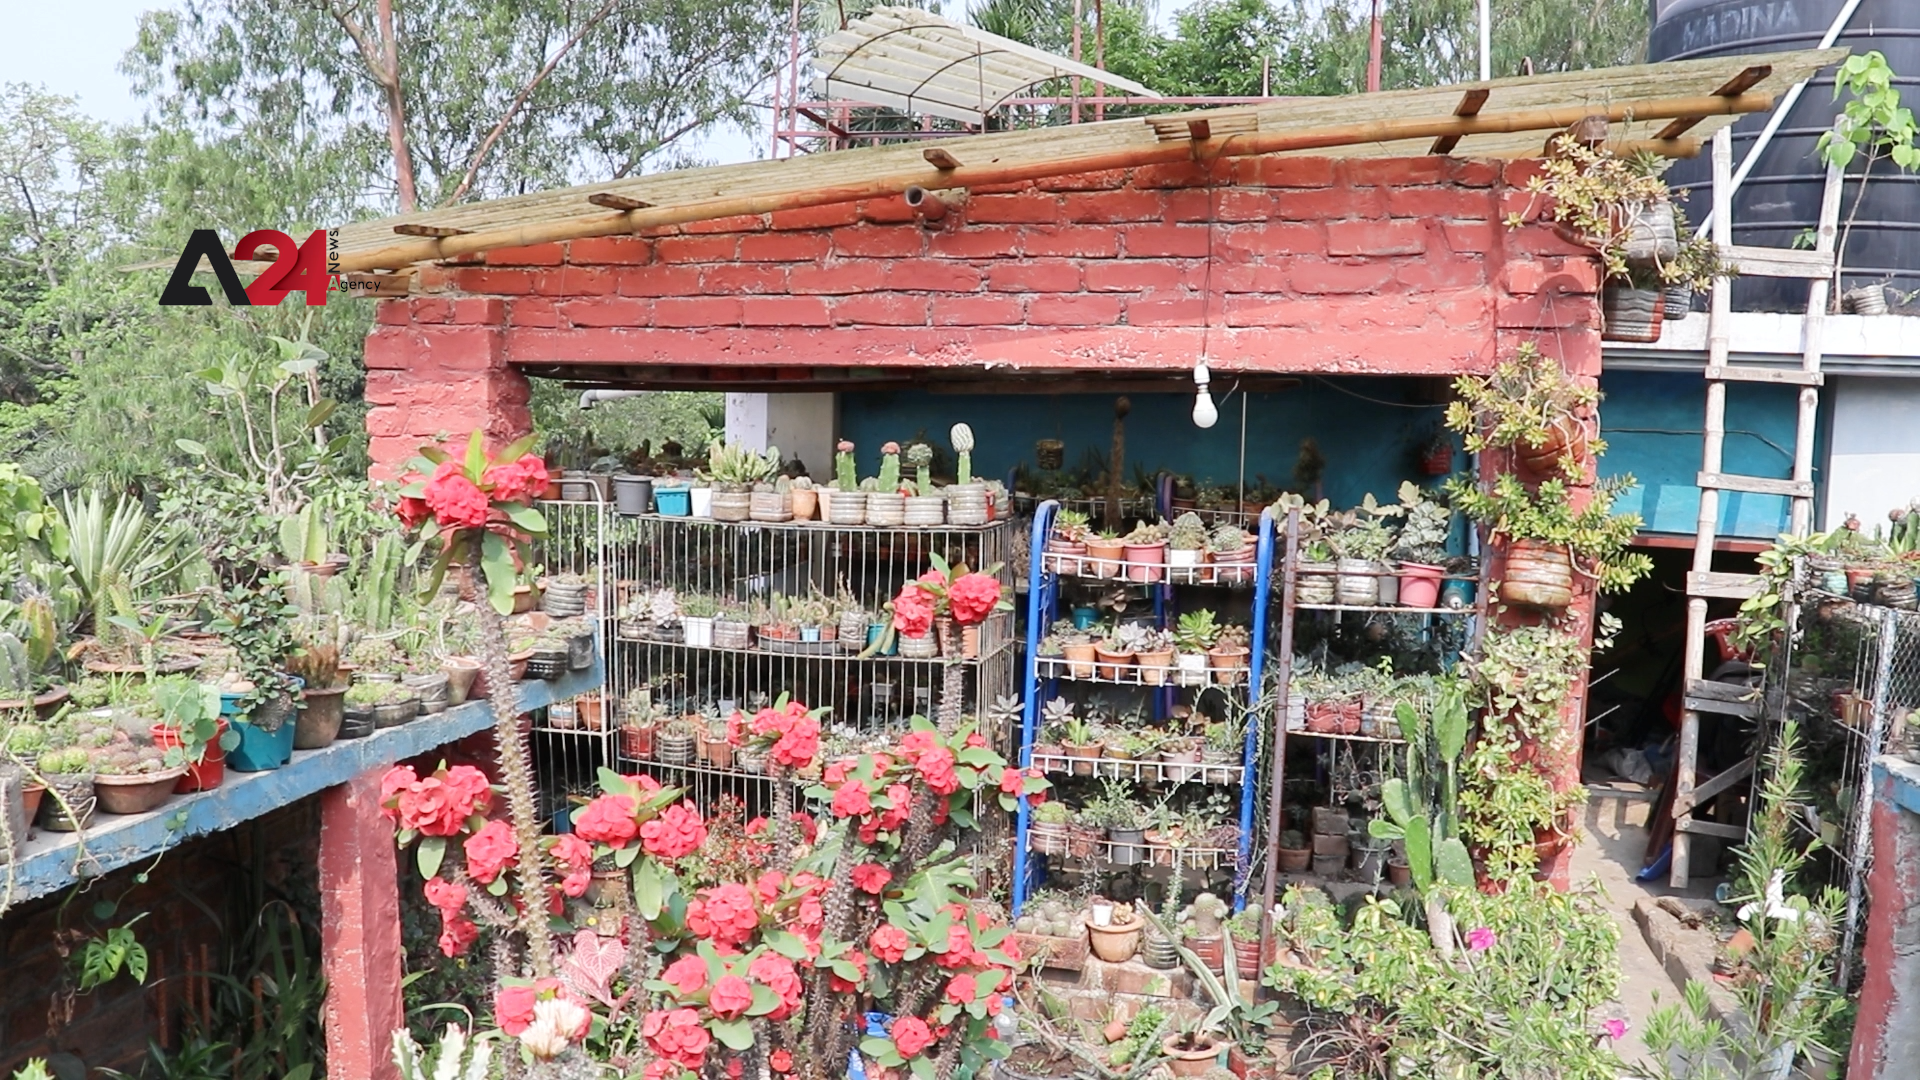 Bangladesh- Roof Gardening is a hobby and means of earning.